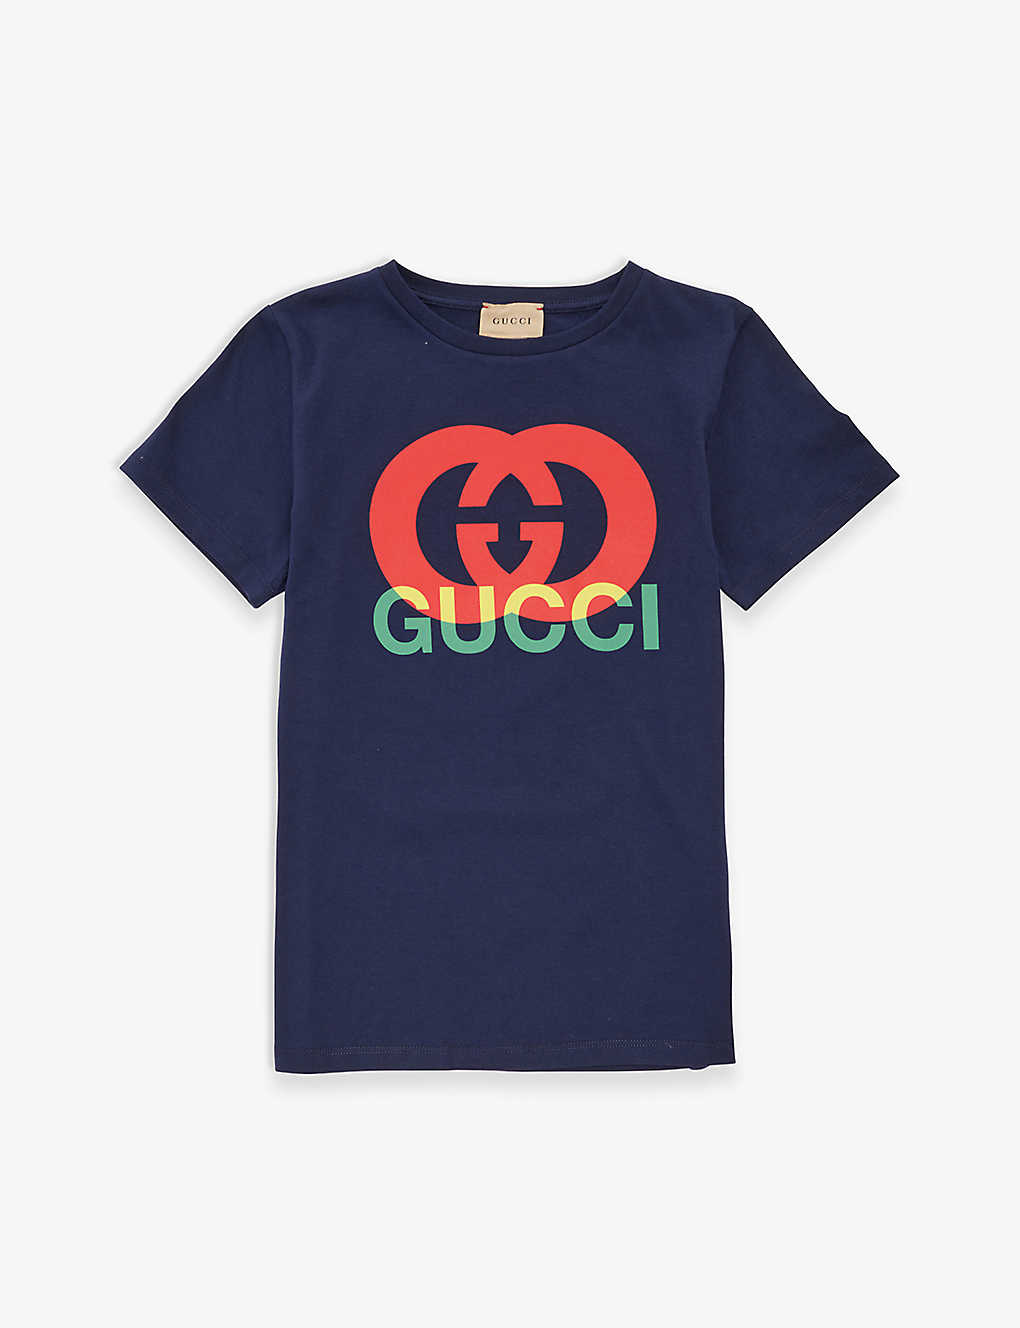 Gucci Kids' Printed T-shirt In Blue